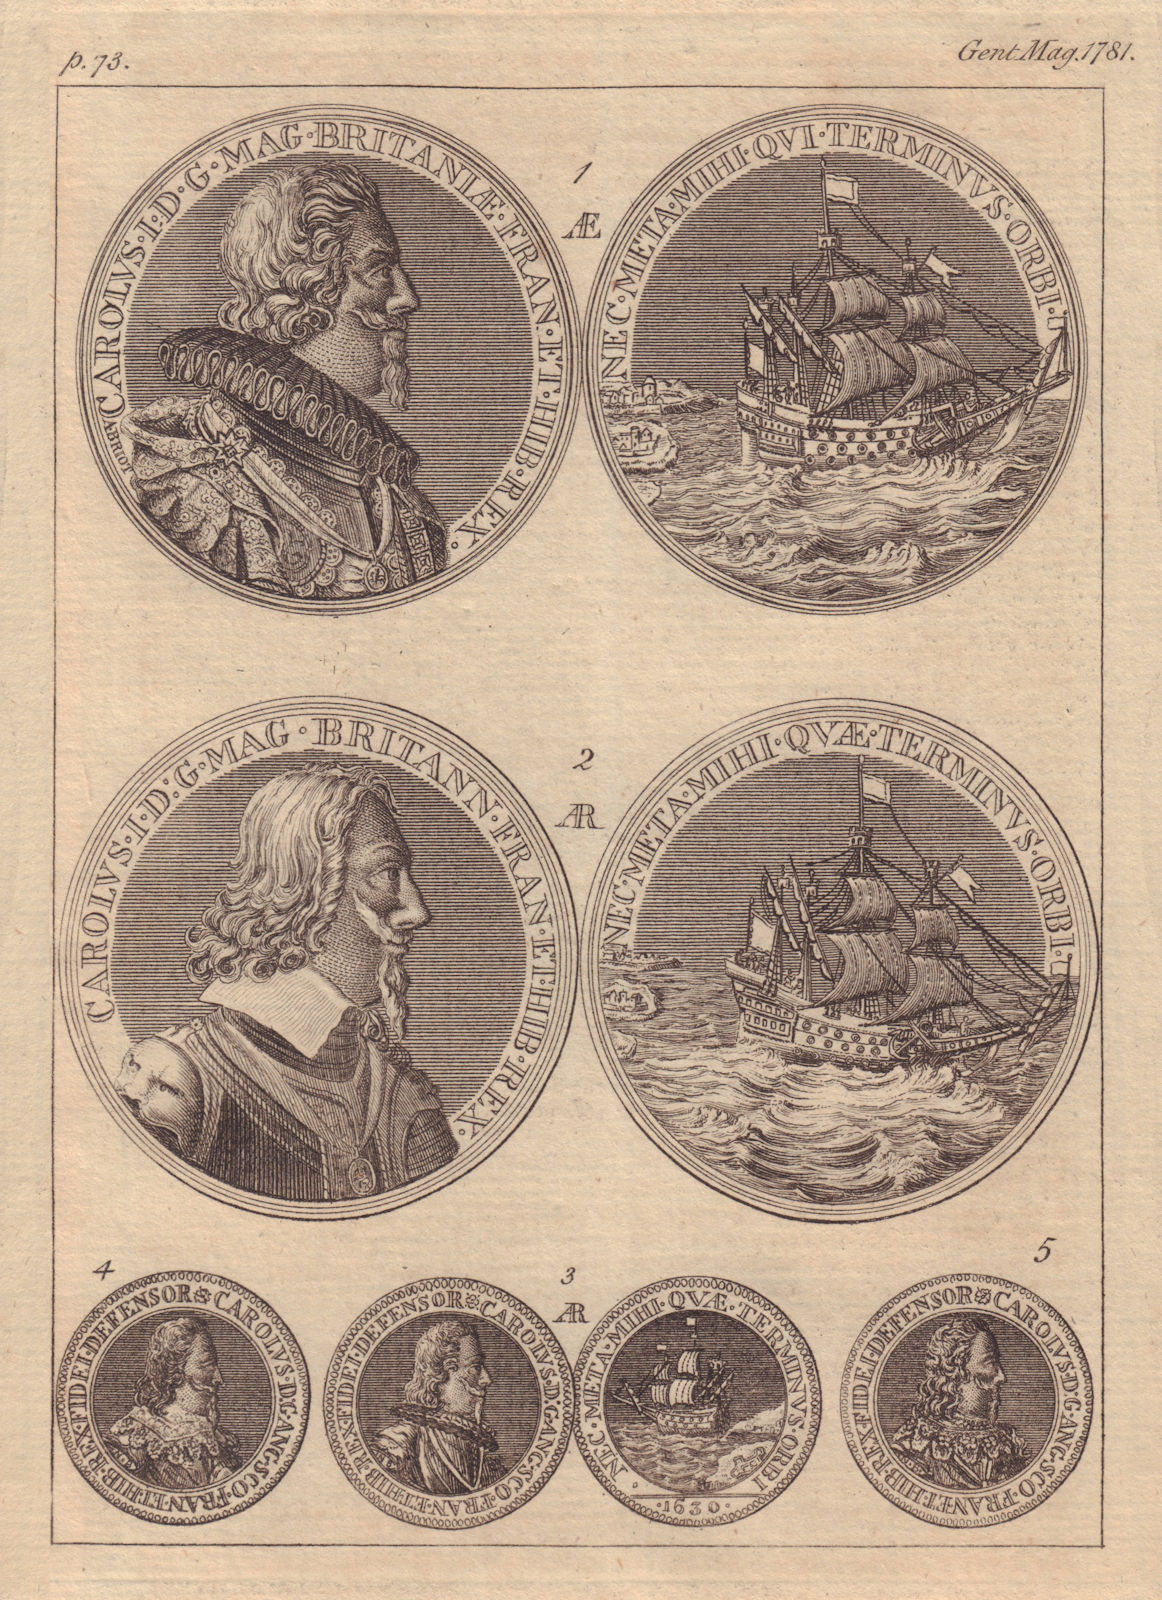 Associate Product English Medals. King Charles I. GENTS MAG 1781 old antique print picture